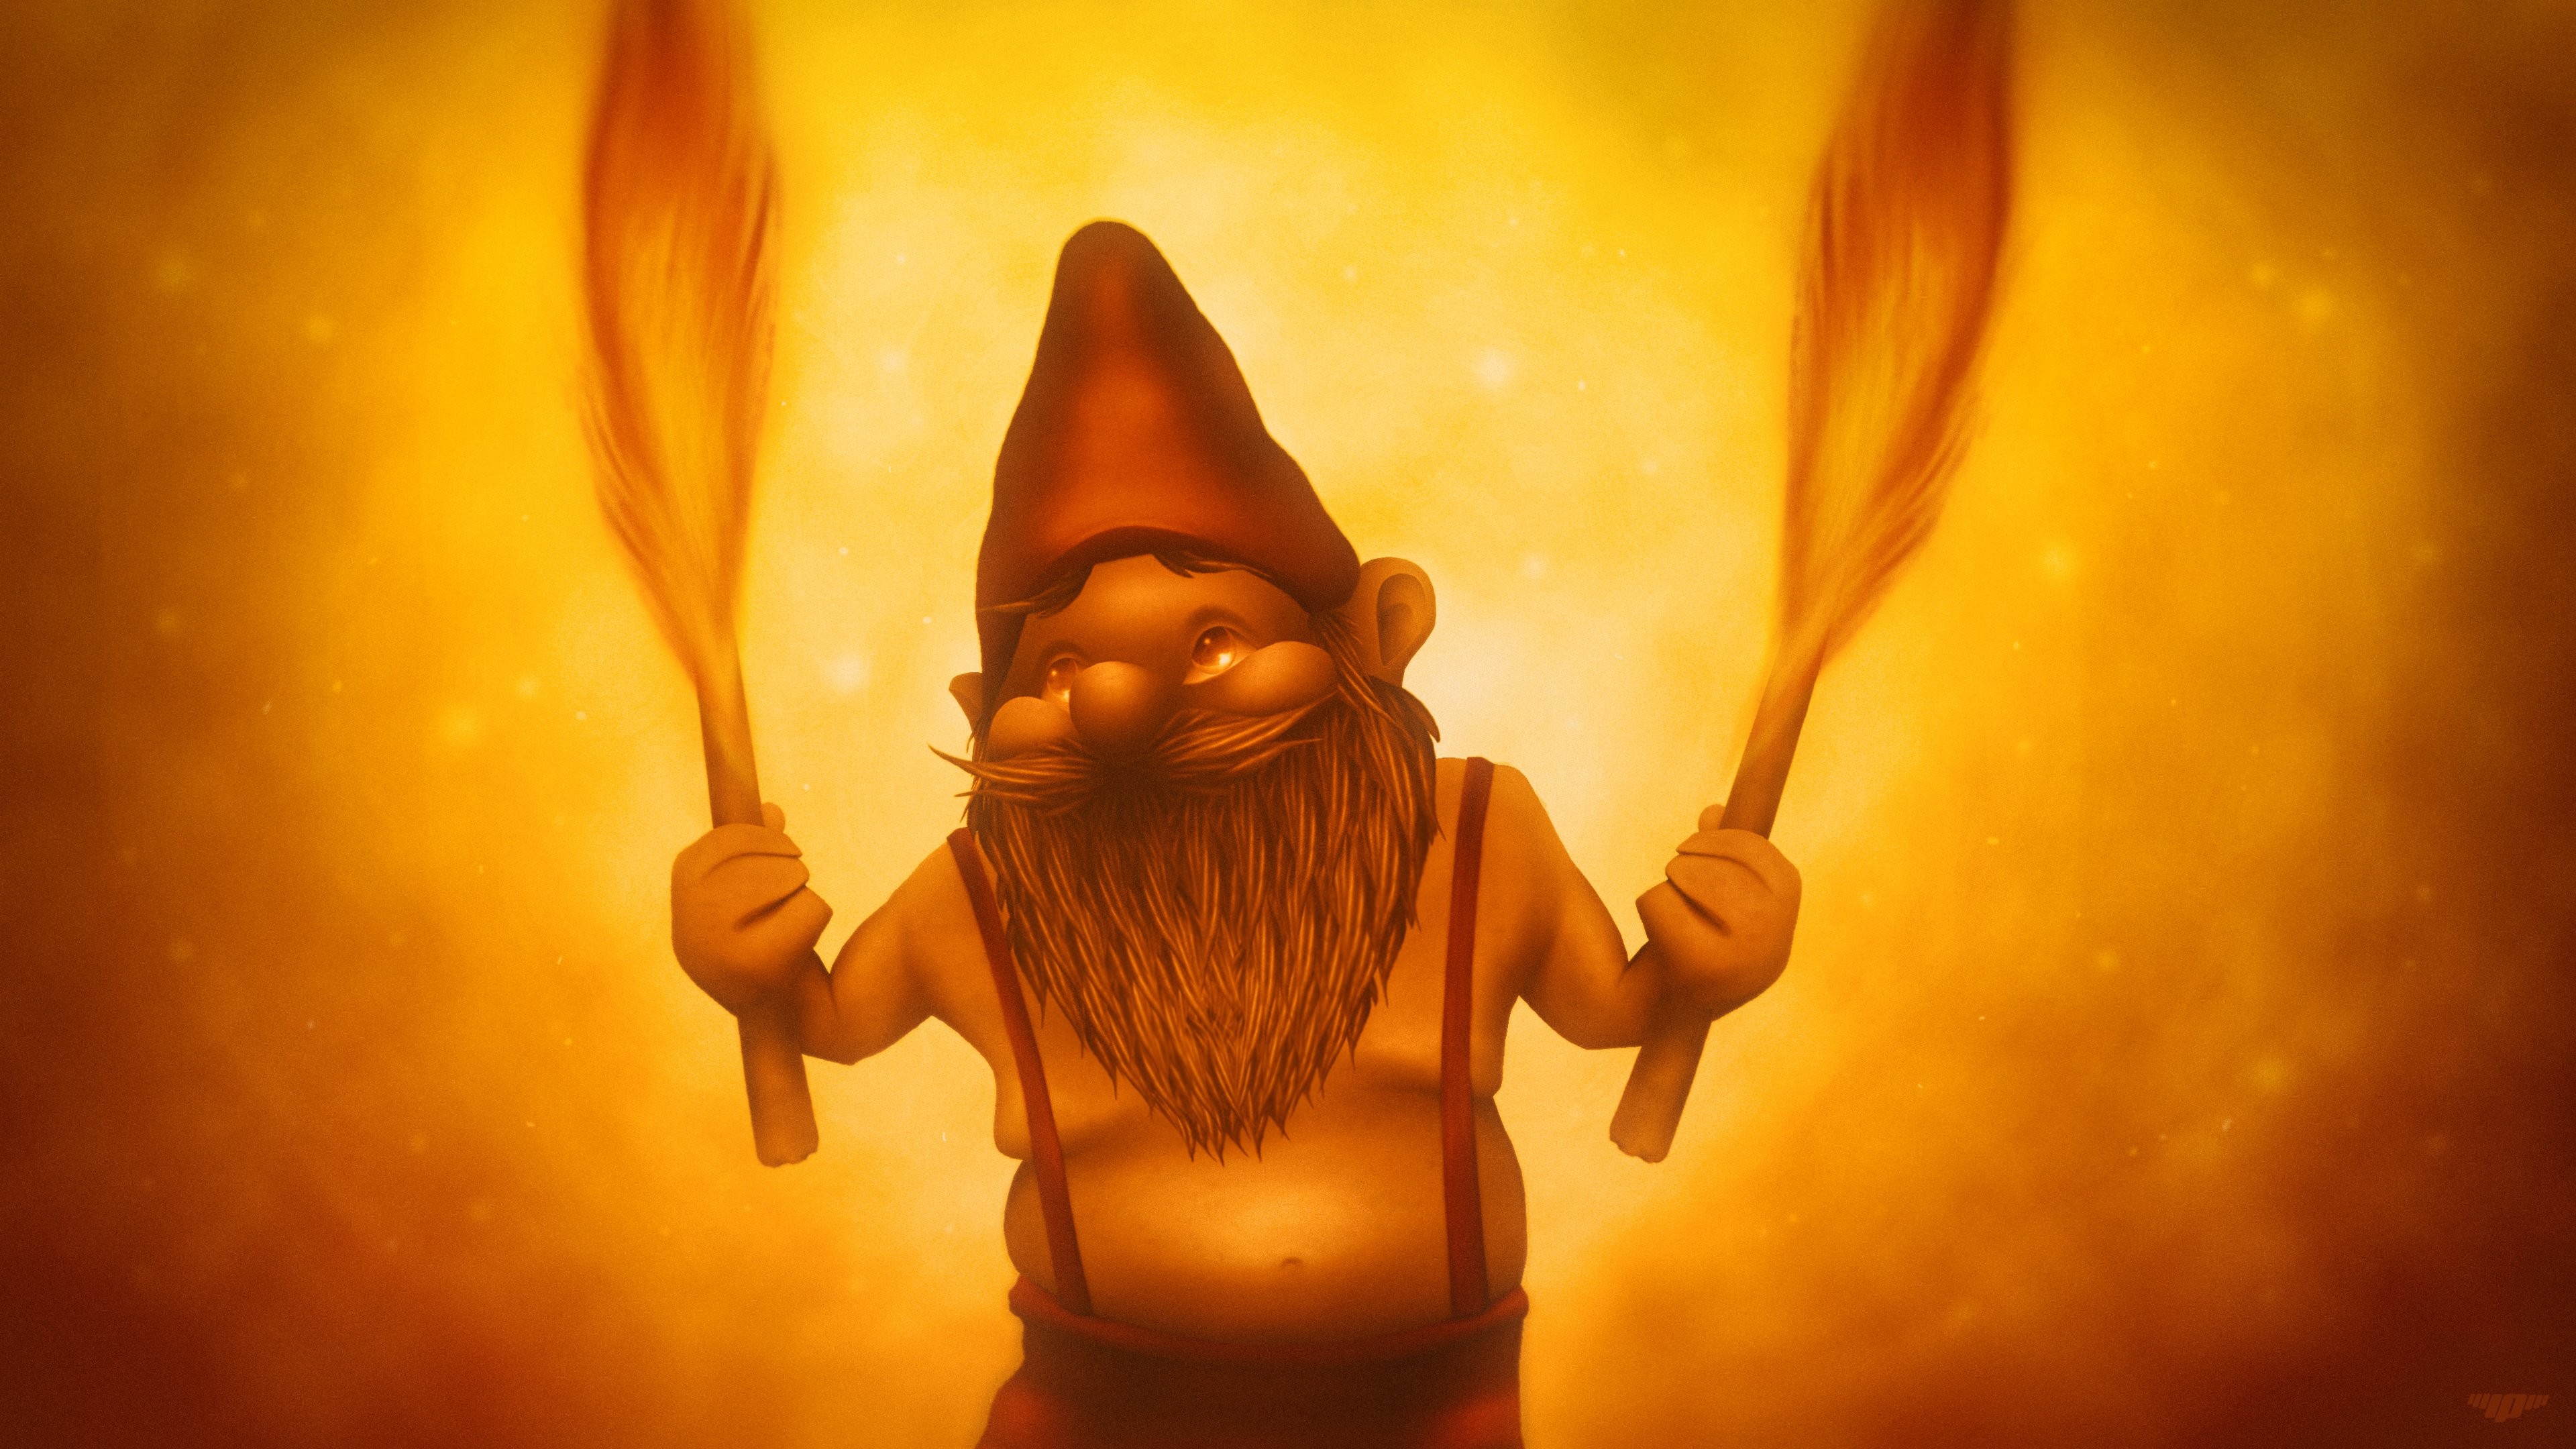 3840x2160 ... Fire gnome gnome download free wallpaper fire on fire hell mac pc  wallpaper ...